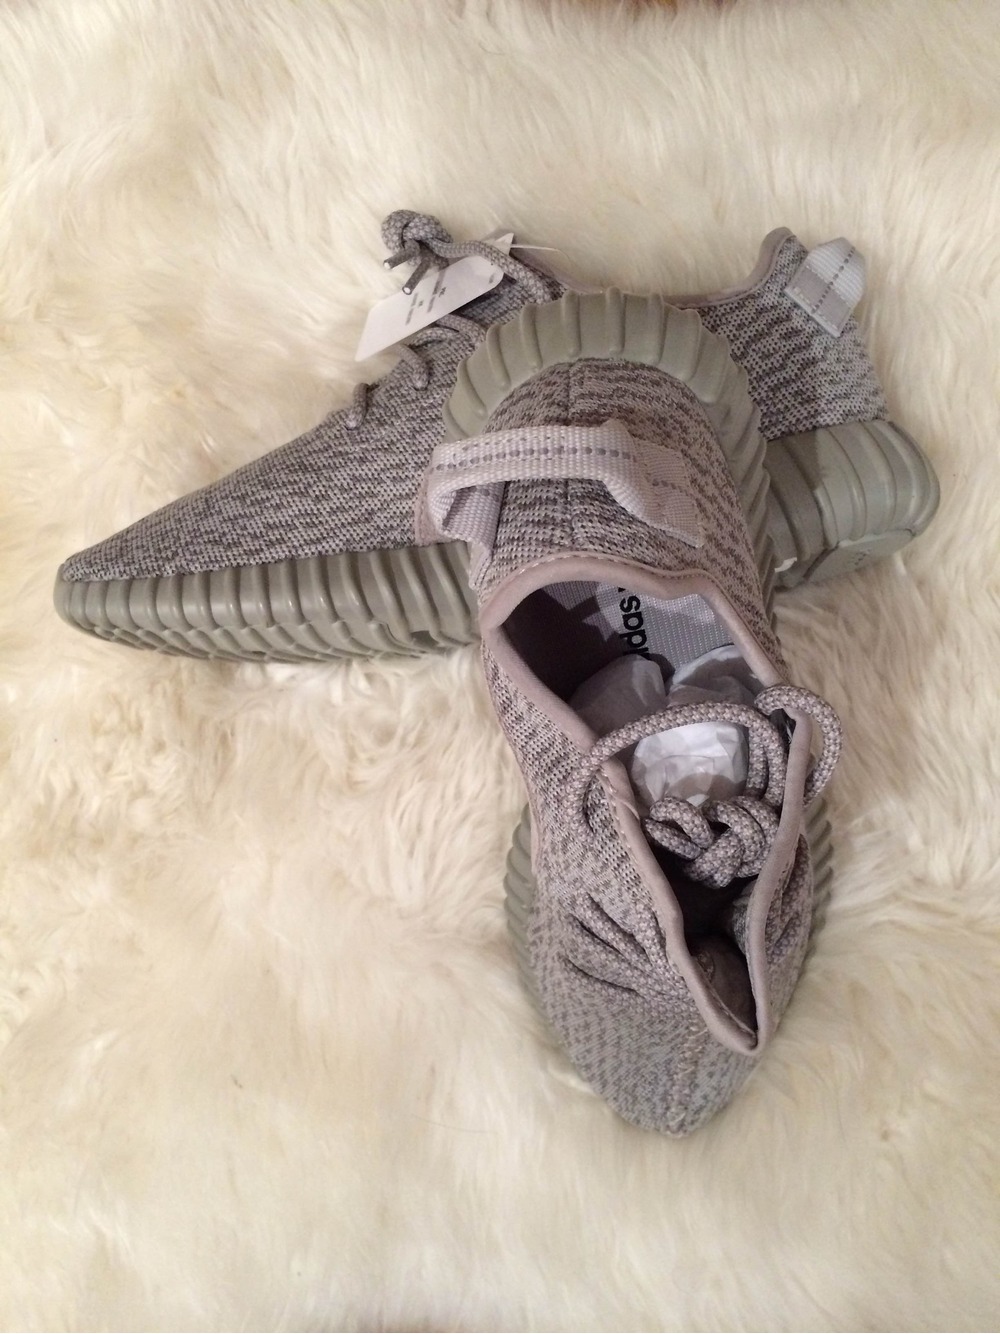 Adidas Yeezy Boost 350 Moonrock $ 199 For Sale Cheap Price